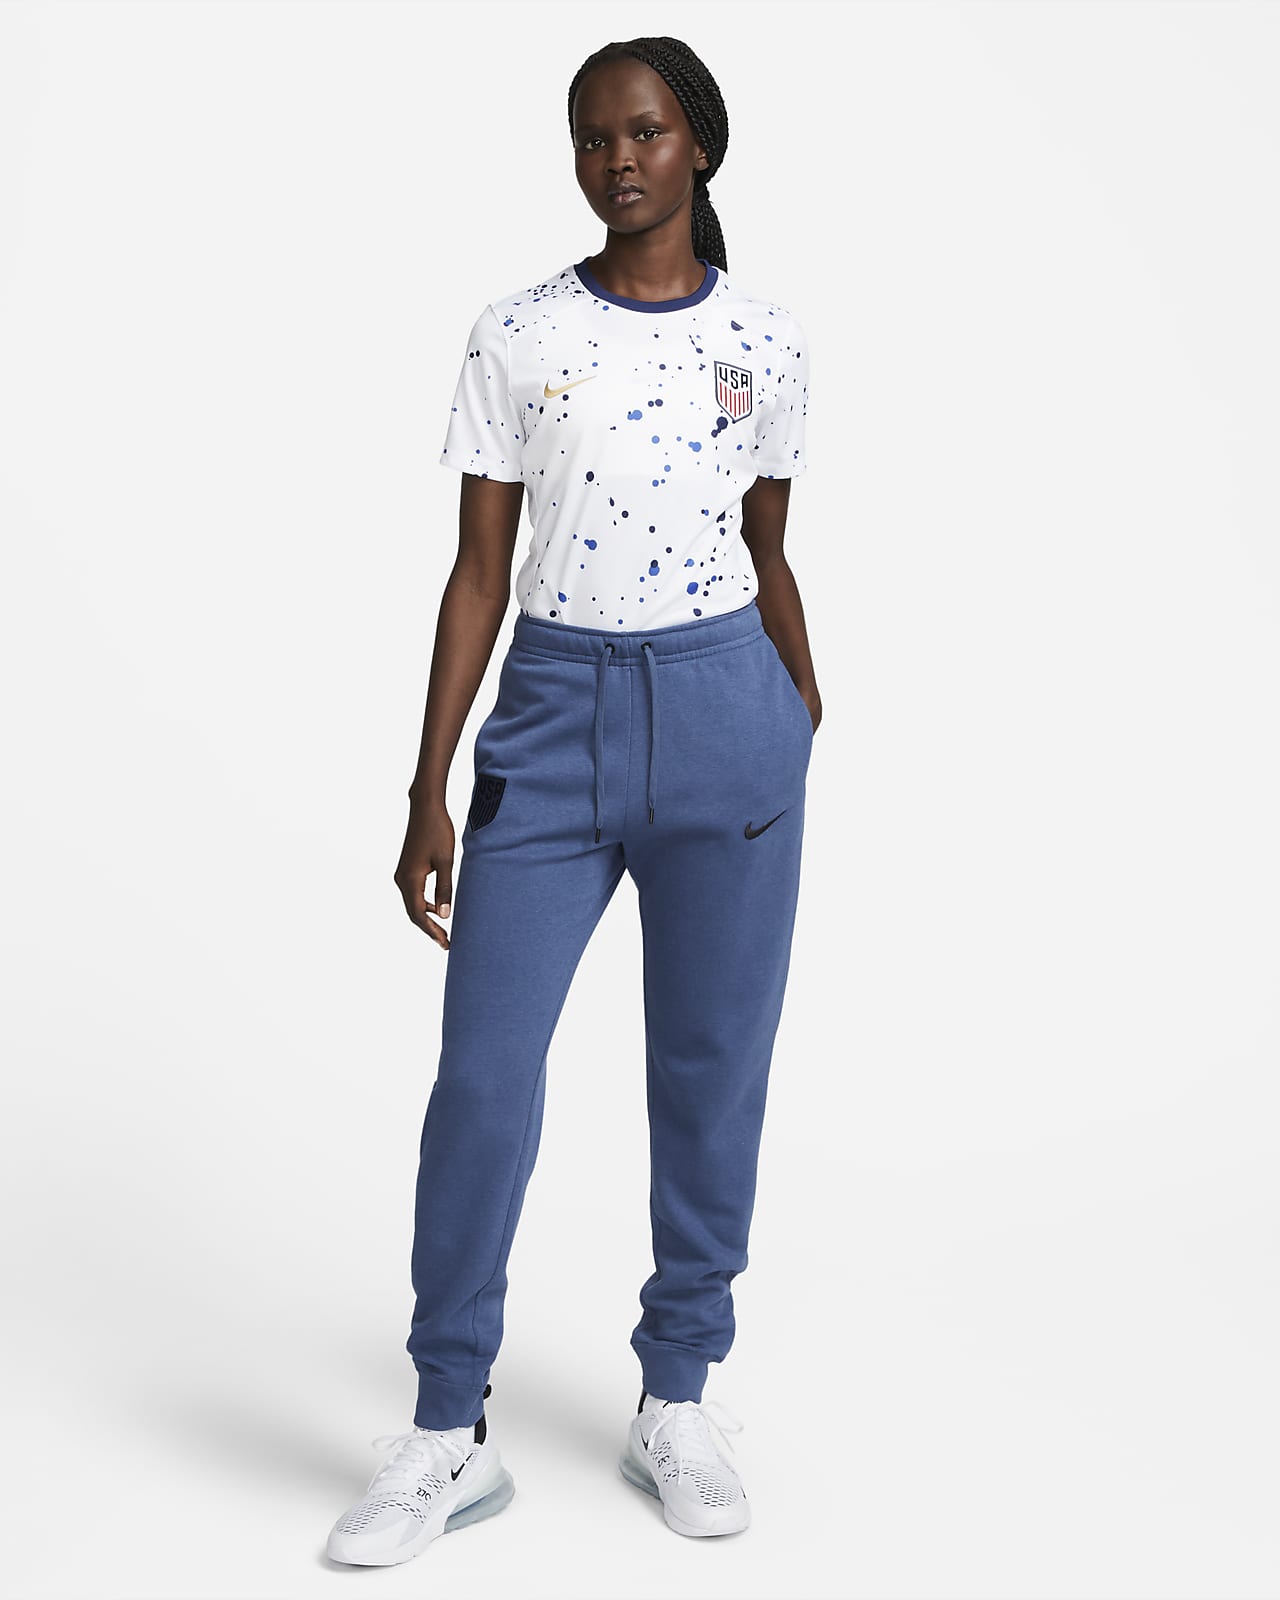 Women's White Trousers & Tights. Nike IN